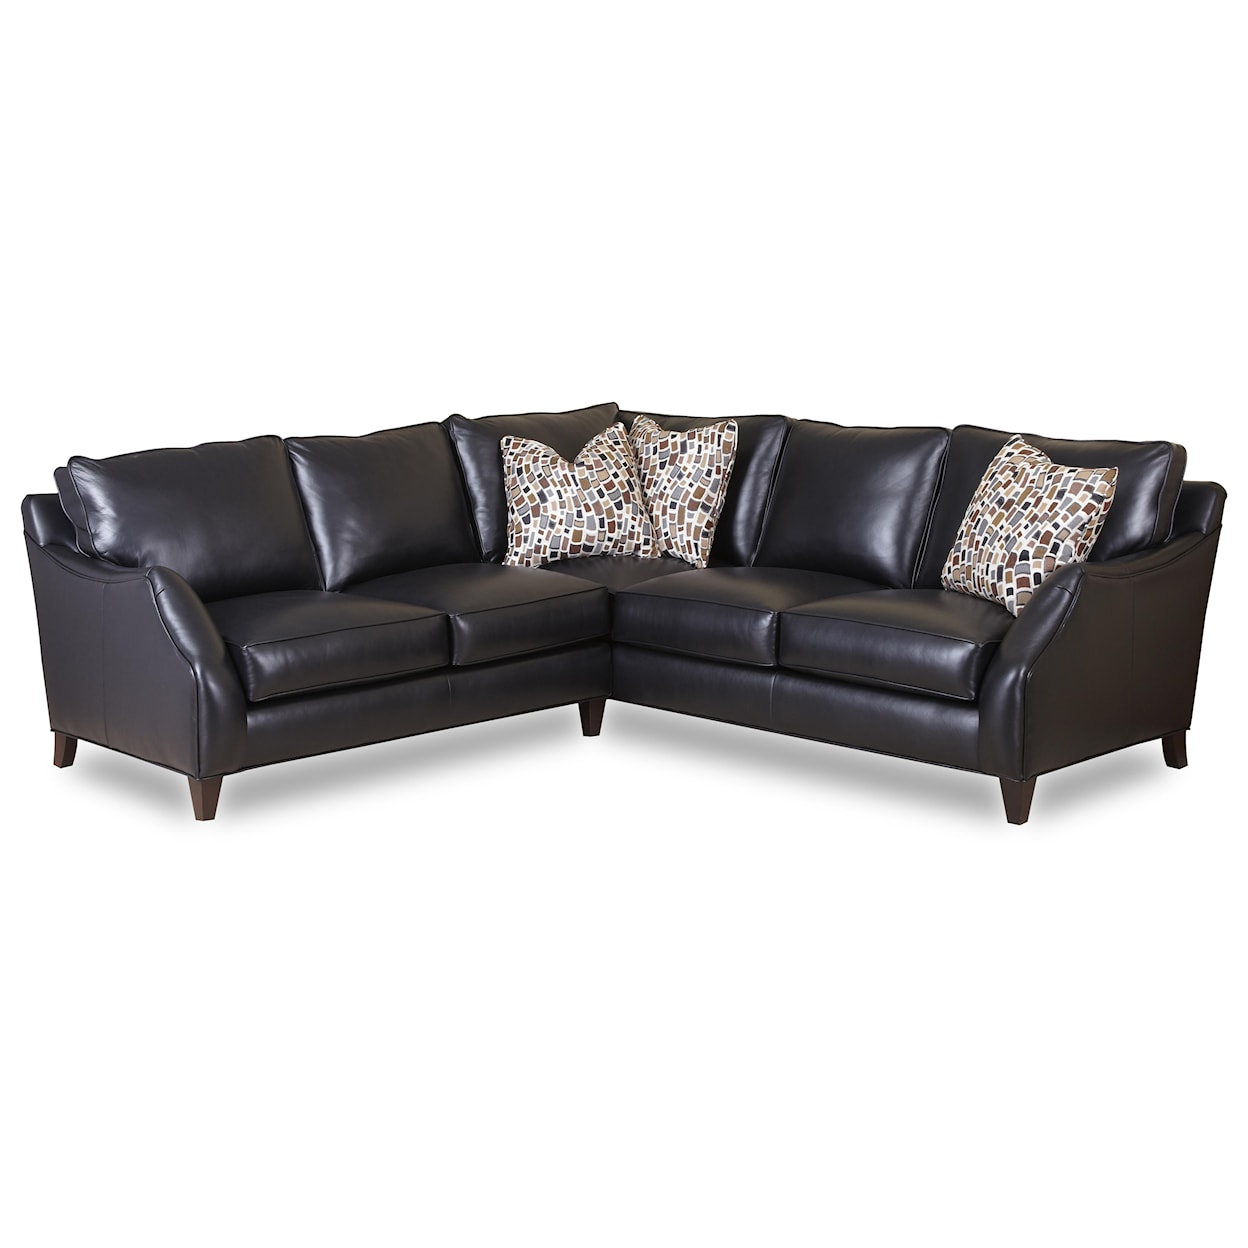 Envision by Bradington Young Laconica Sectional Sofa